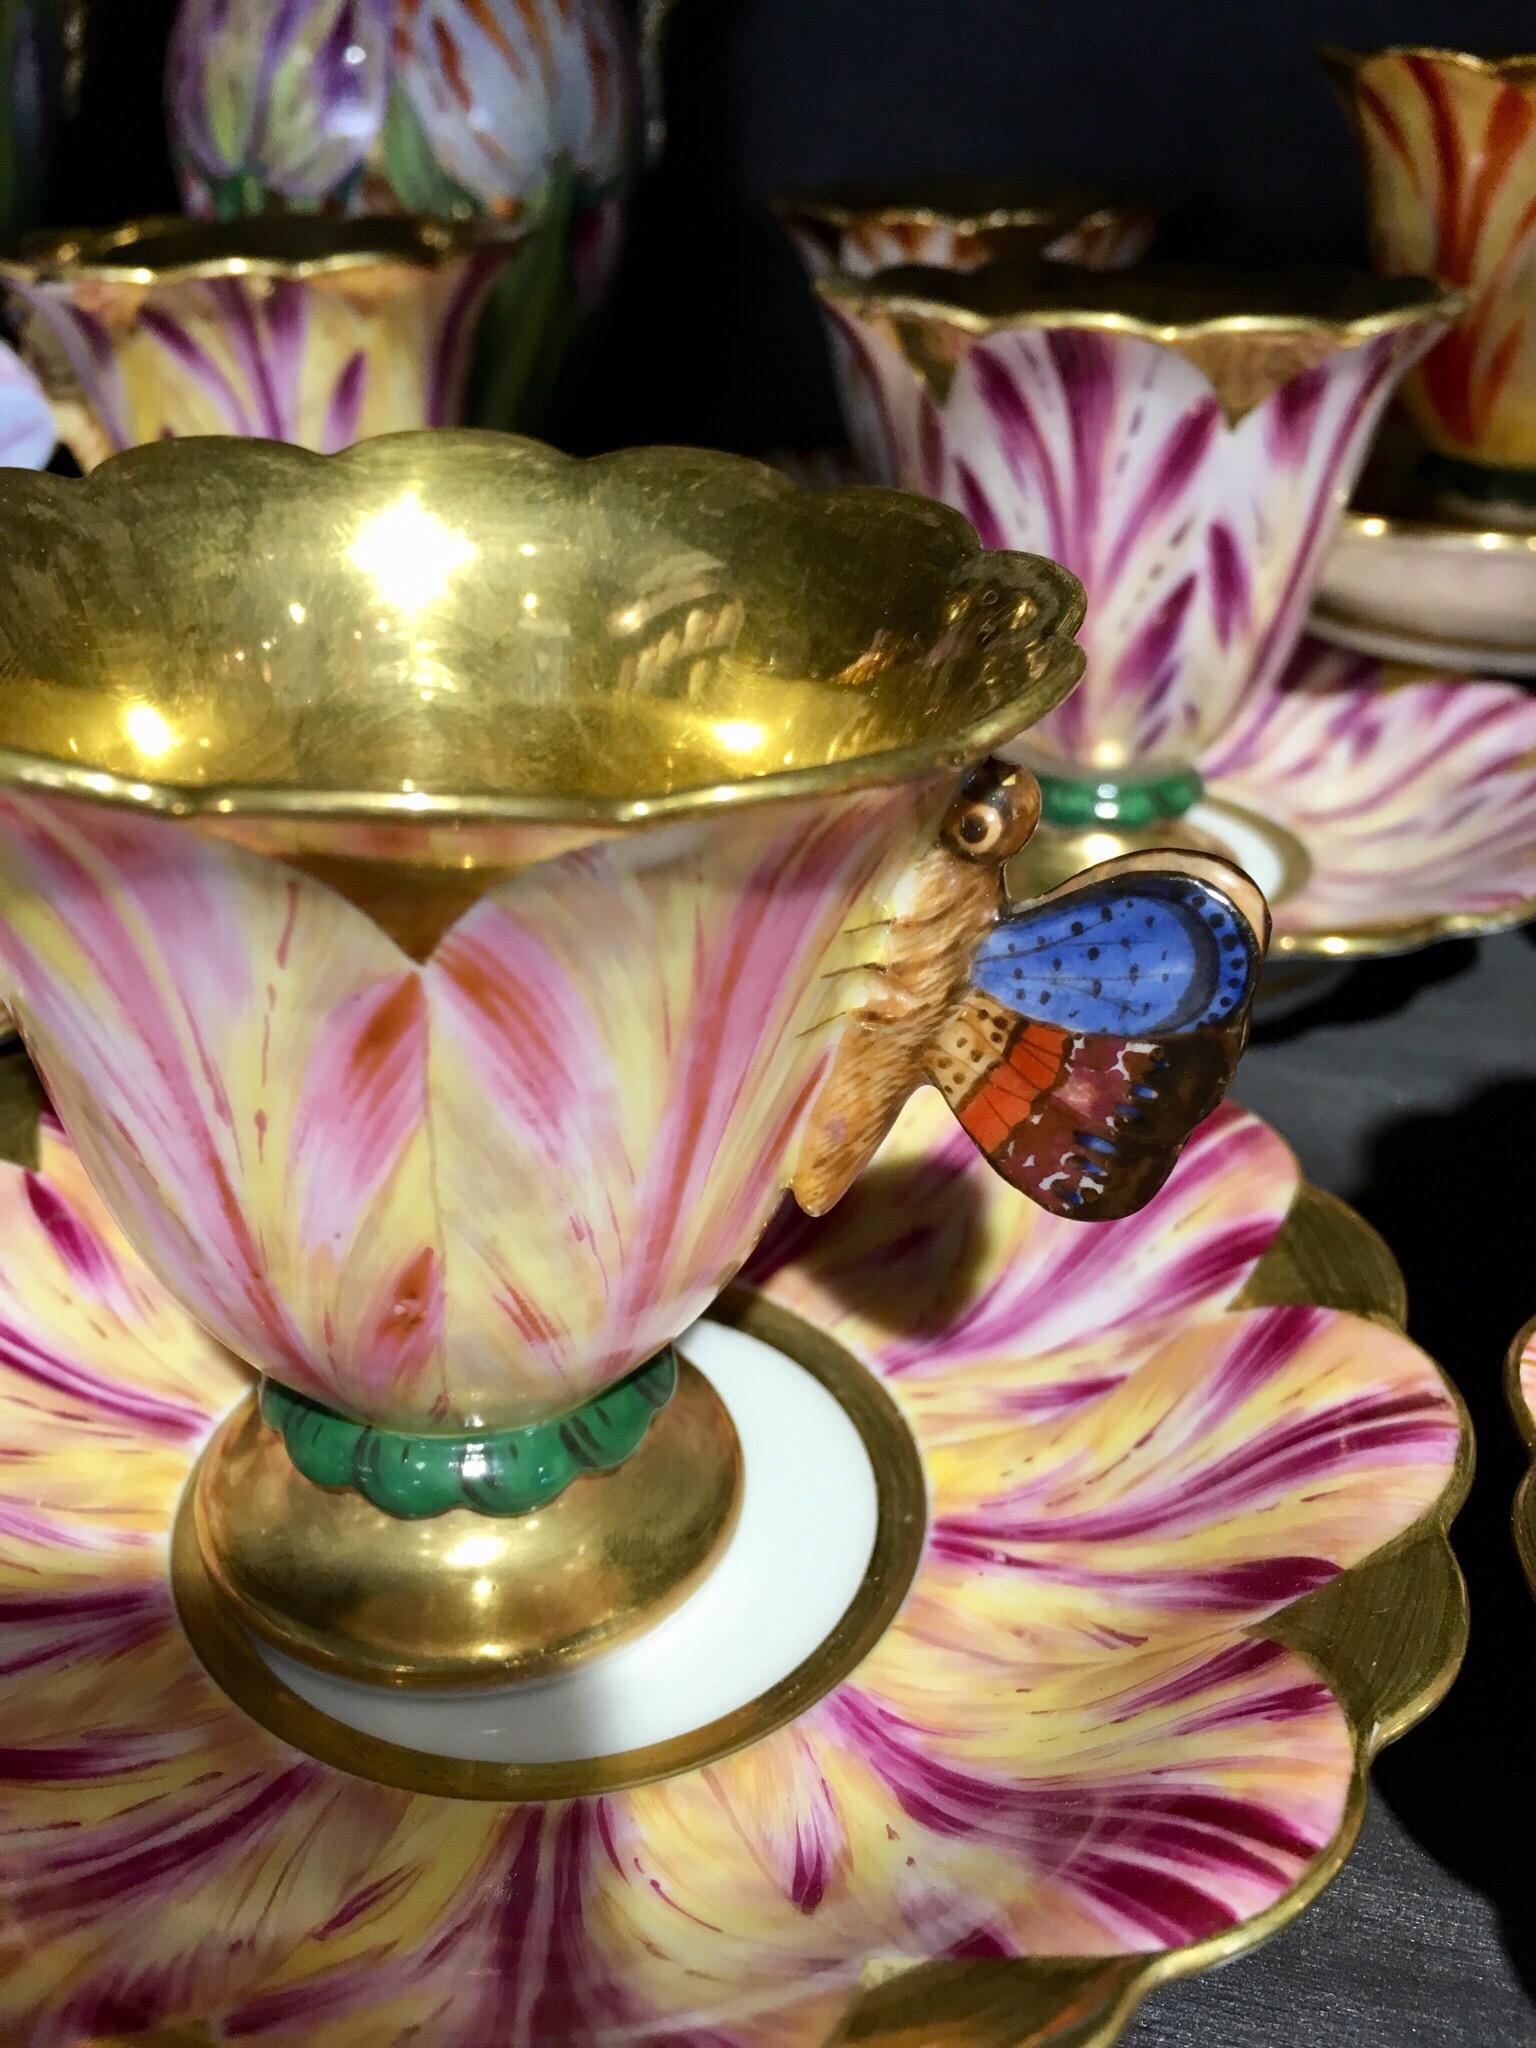 Exceptional coffee service, circa 1850, Porcelain of Paris. Hand-painted and rare.
A pattern of tulips and multicolored butterflies.
This service is composed of 11 coffee cups, 11 cups, one coffee maker, one water jug, one milk jug and one sugar